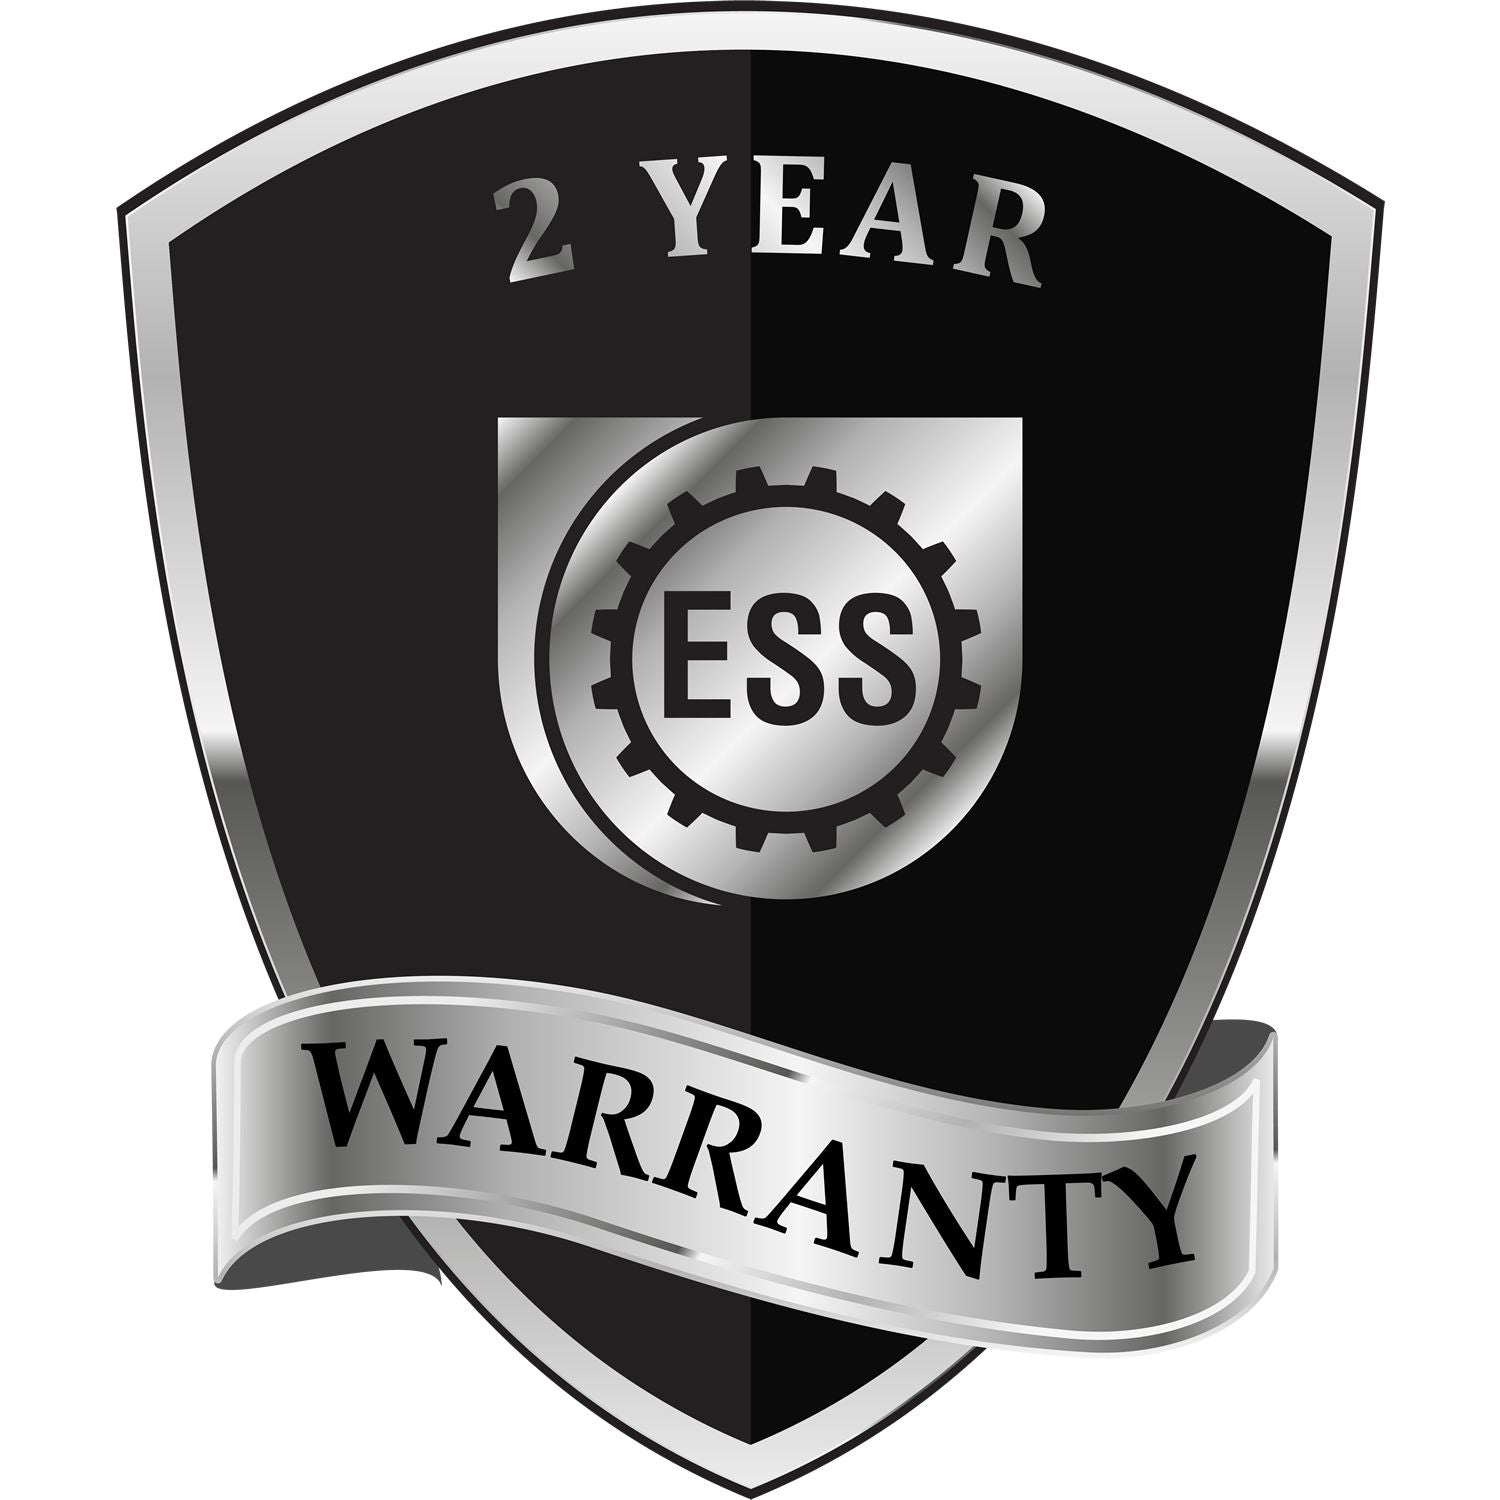 A black and silver badge or emblem showing warranty information for the Hybrid Iowa Land Surveyor Seal